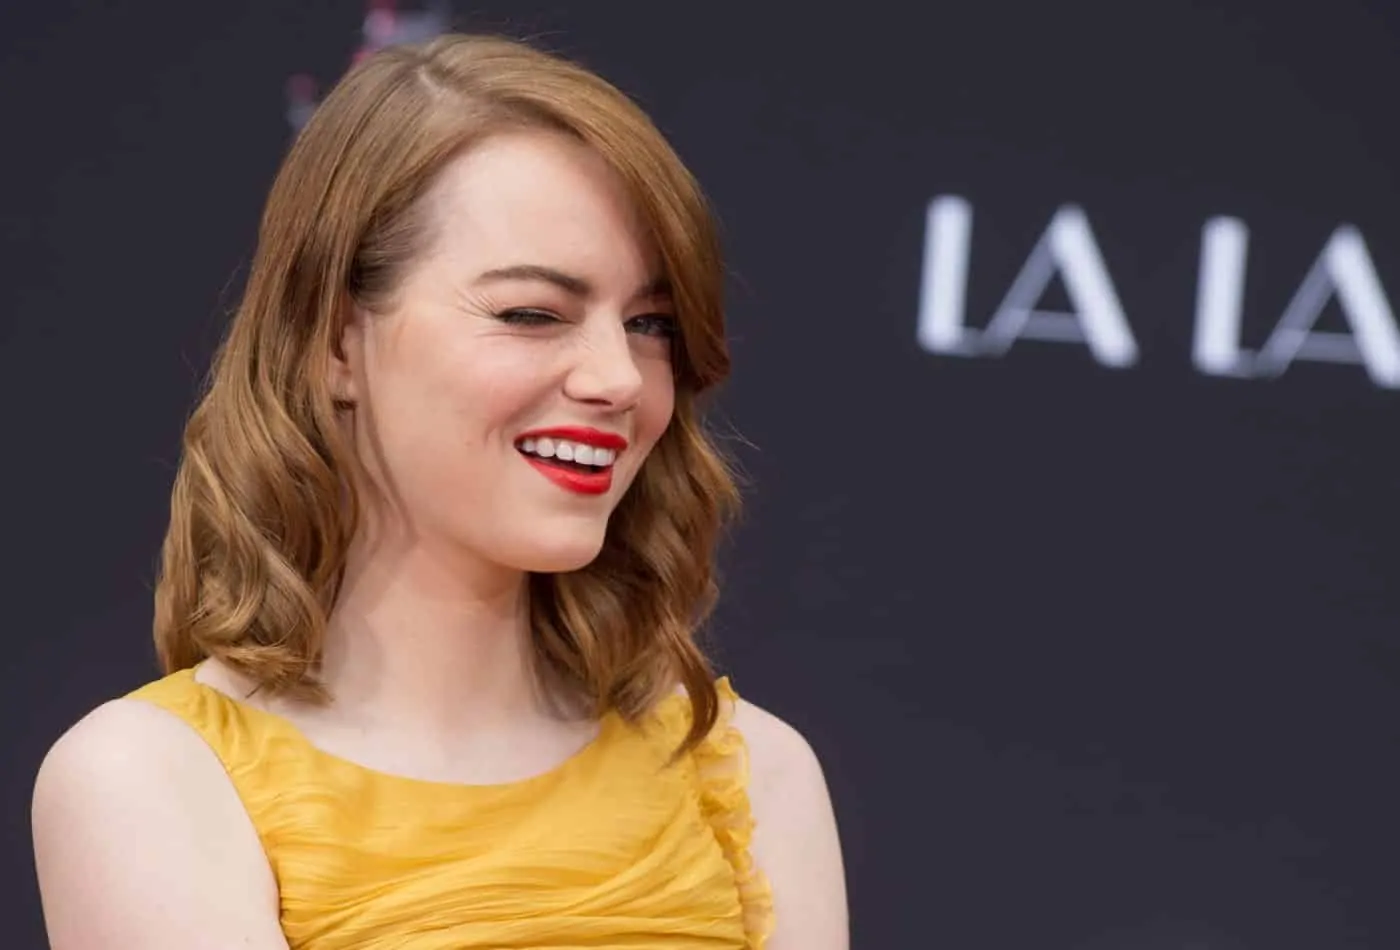 Top 10 Most Popular Hollywood Actresses - Emma Stone